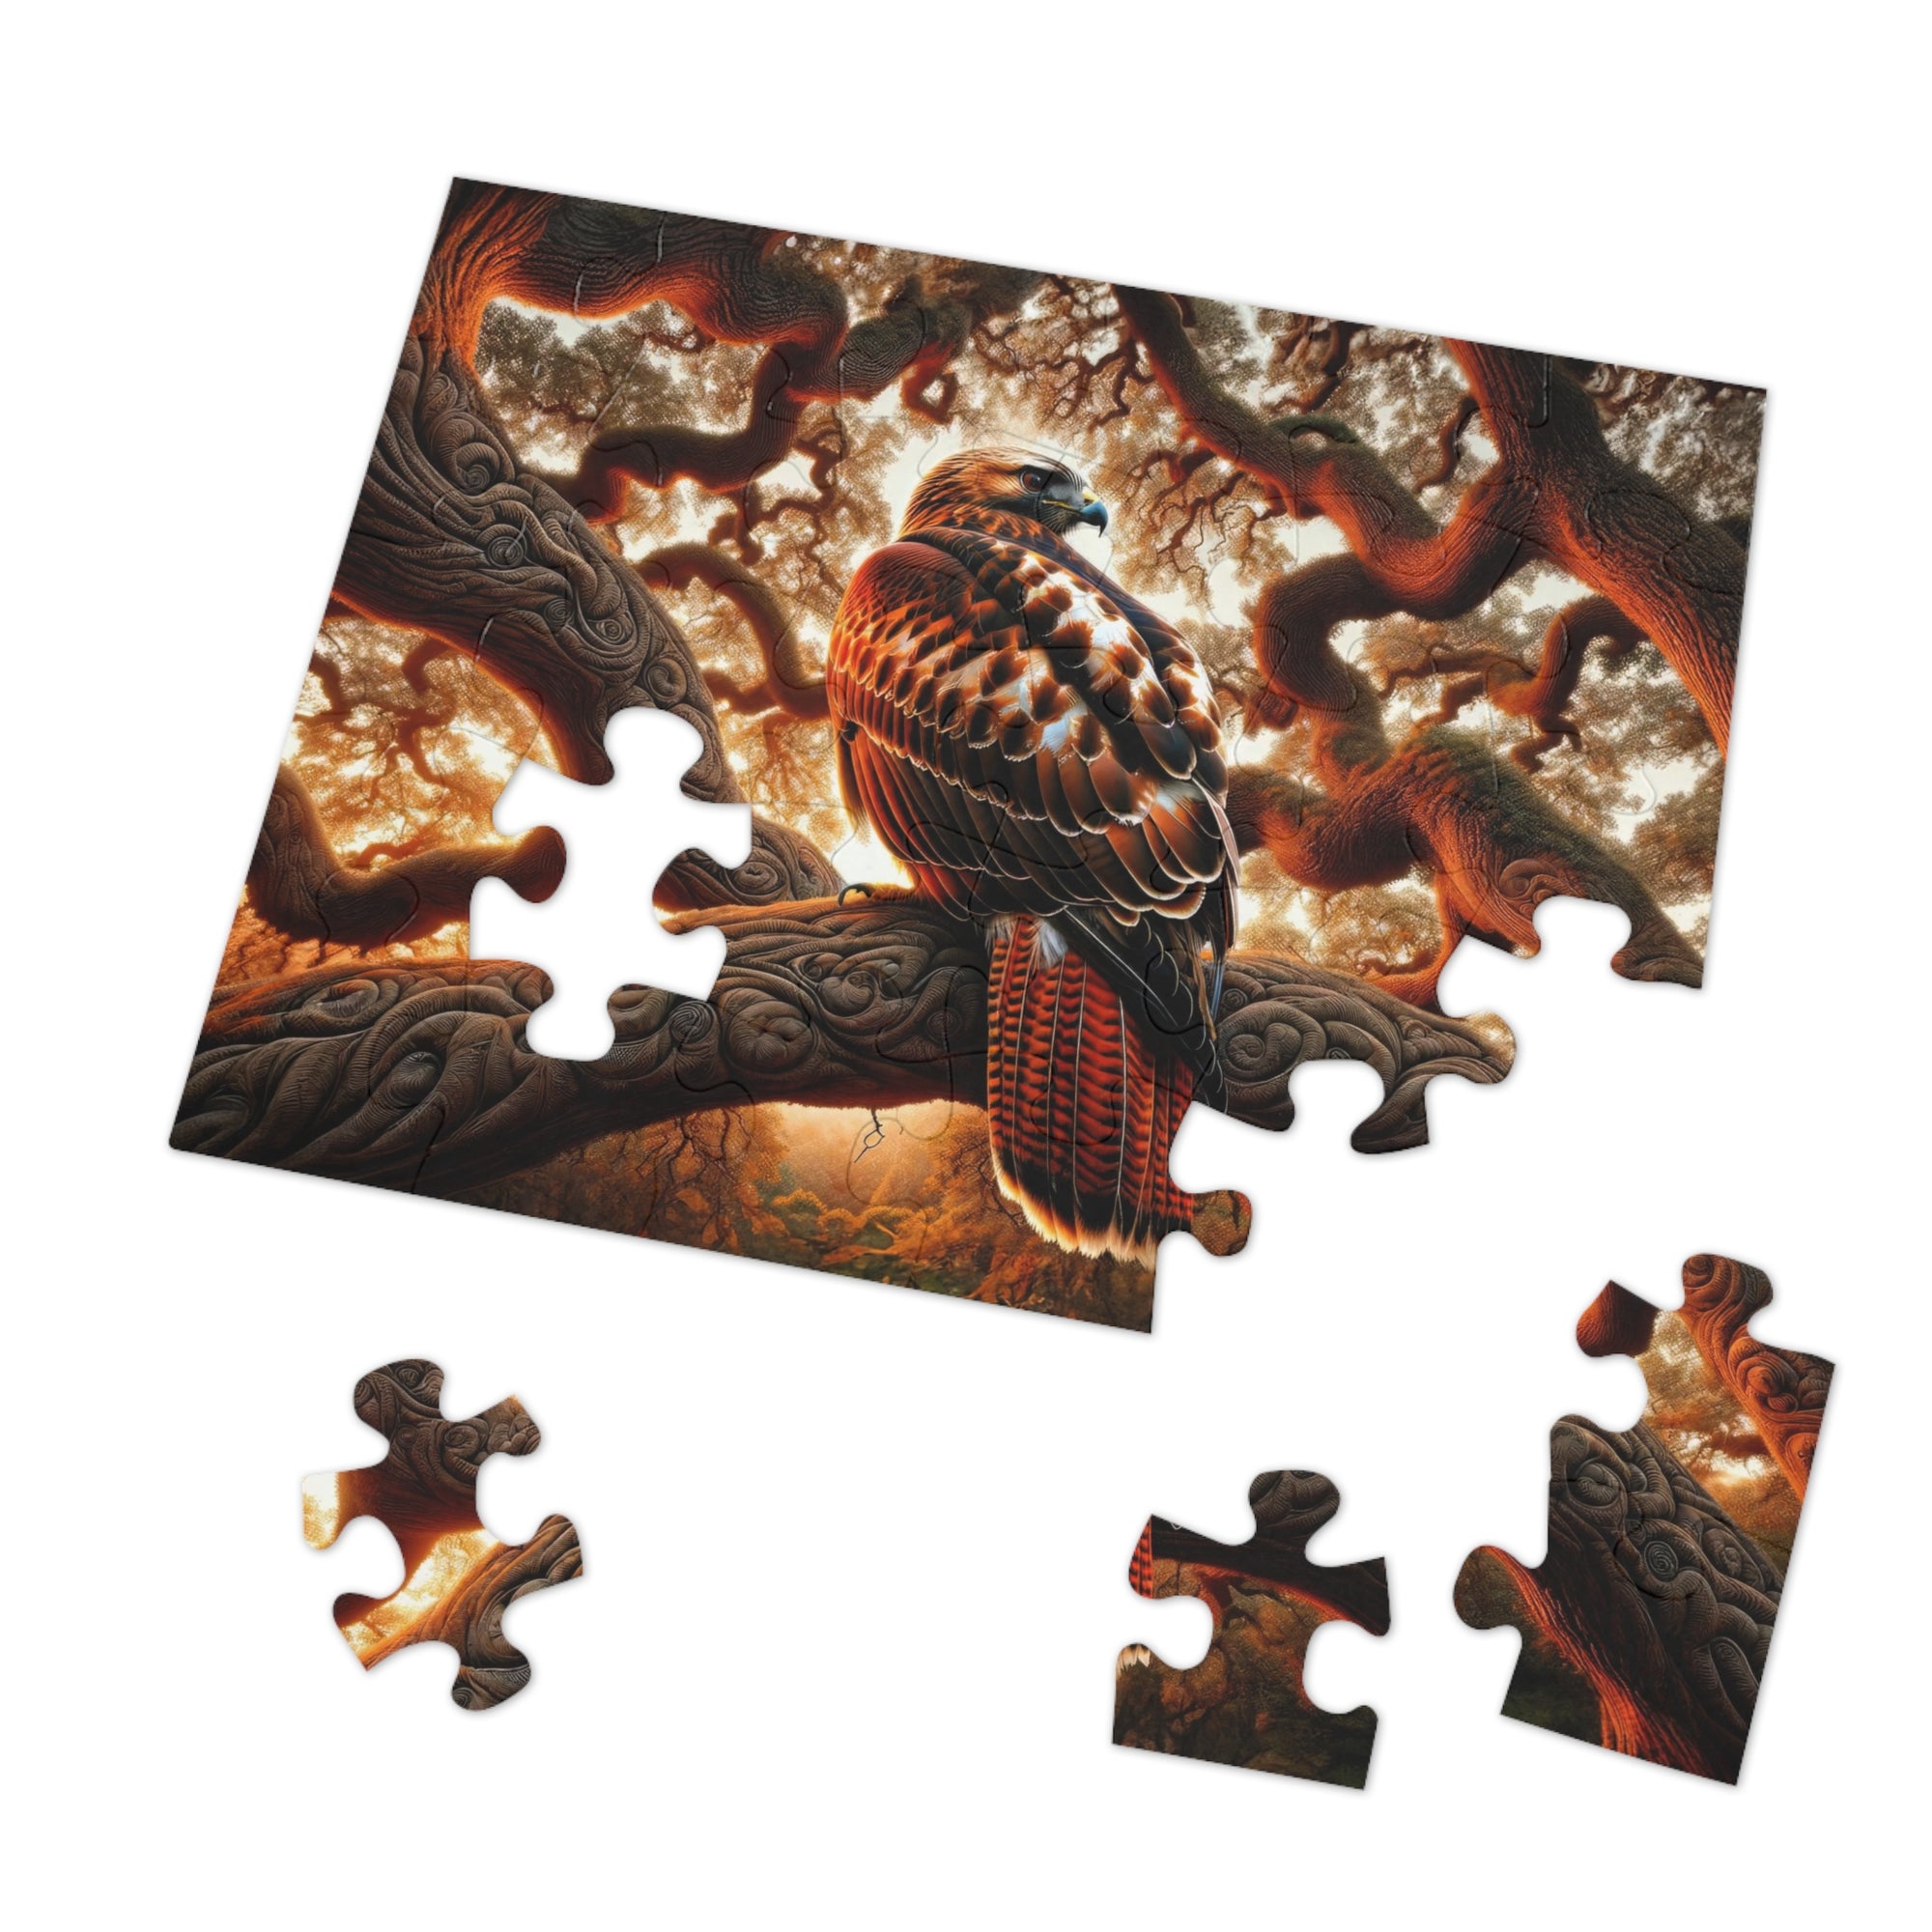 Guardian of the Twisted Oaks Jigsaw Puzzle